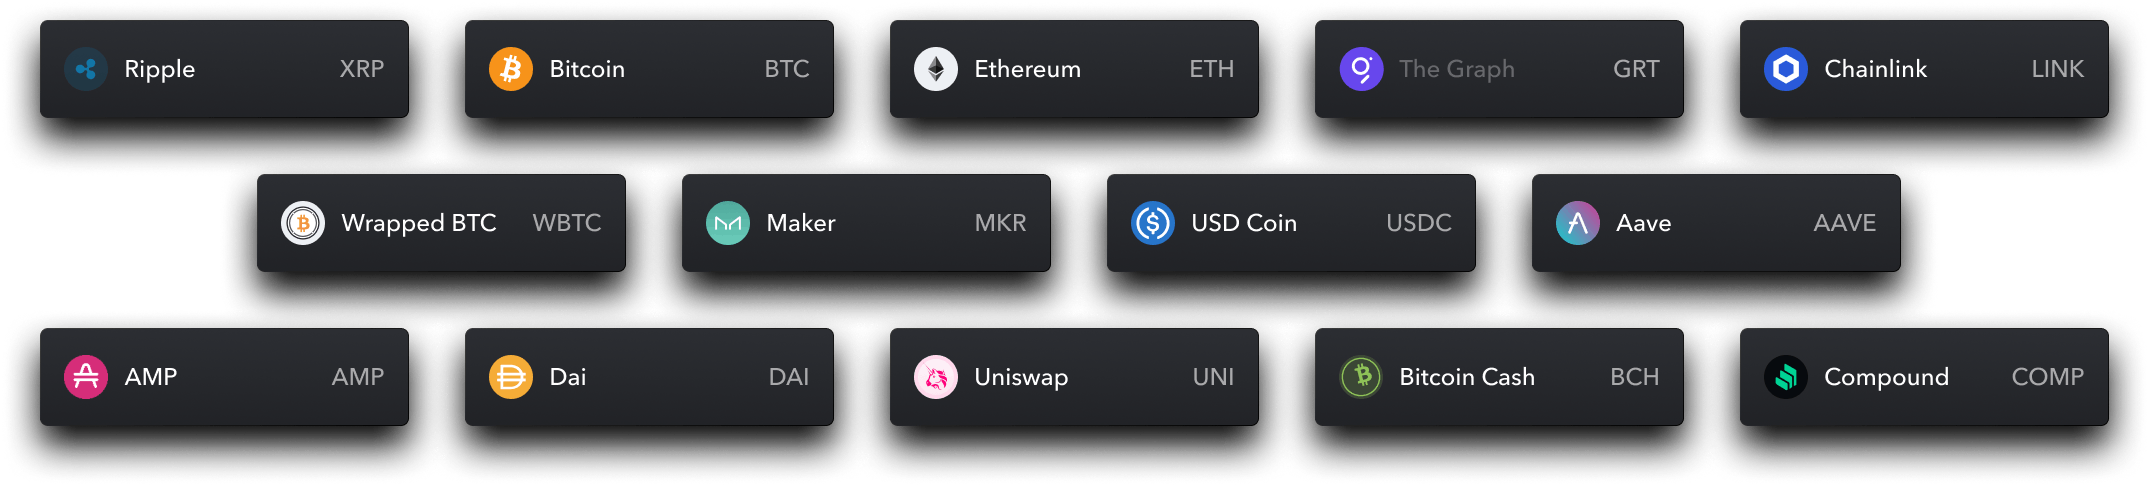 A visual of various cryptocurrency icons